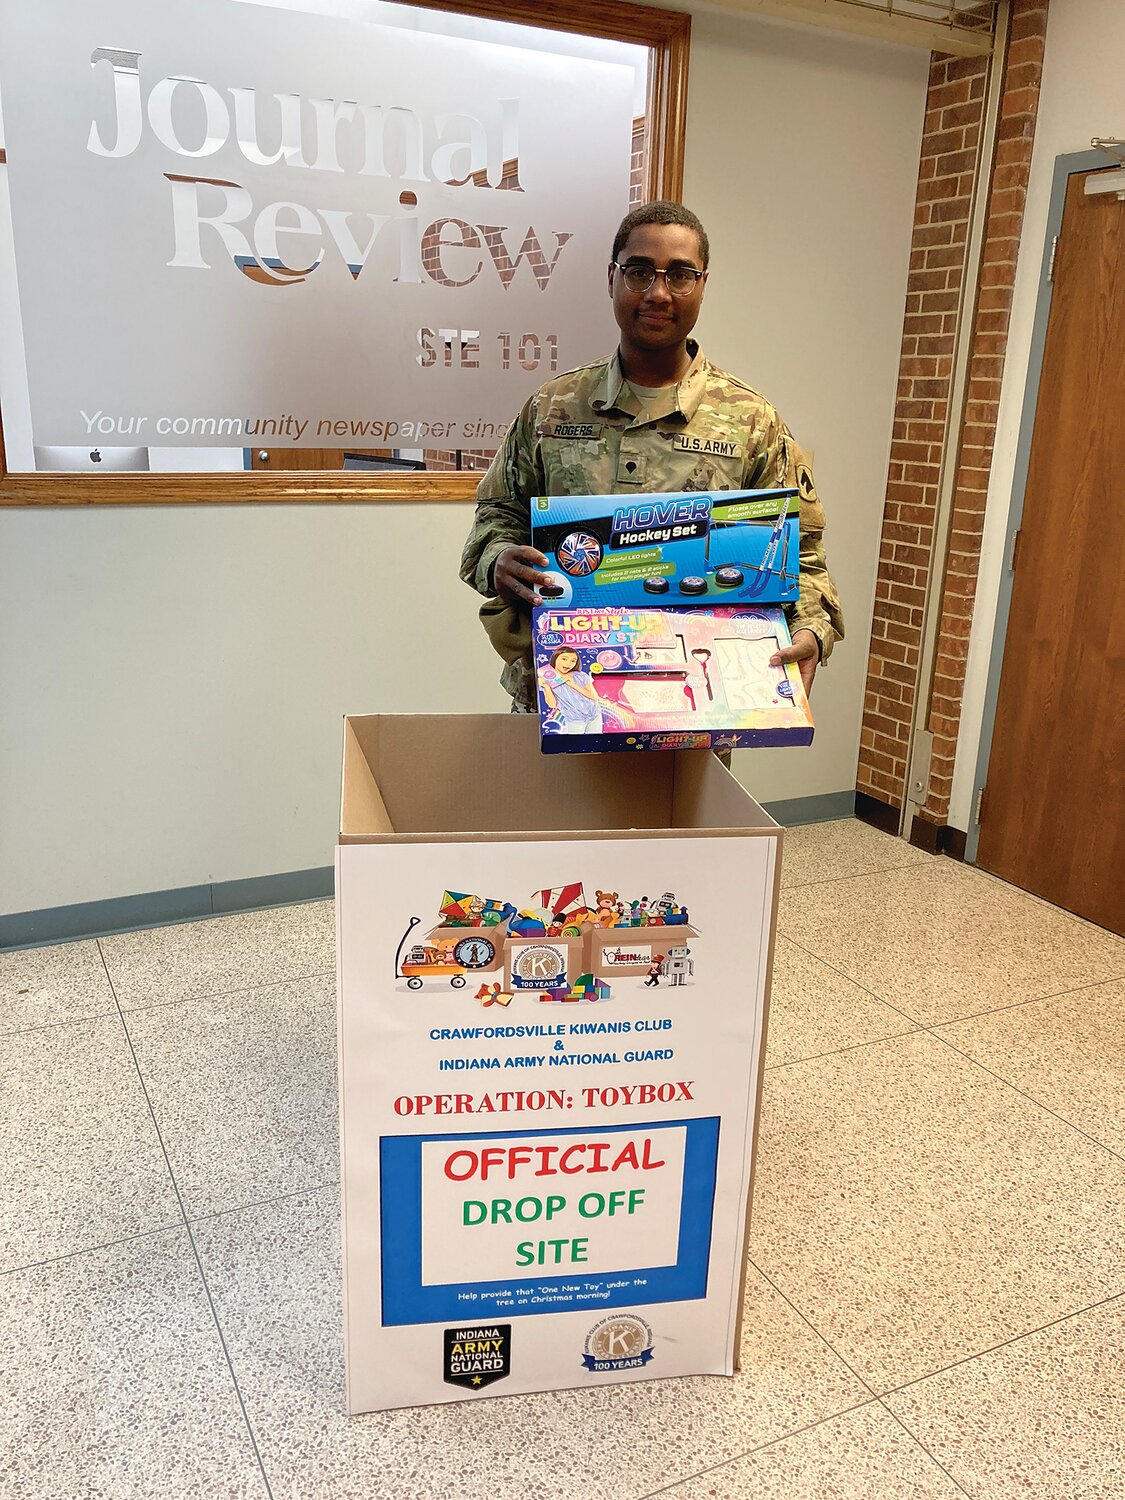 A member of the Indiana National Guard collects donations at the Journal Review for Operation: Toybox. The local newspaper has participated several years as an official drop off site. The annual toy drive organized by the Kiwanis Club helps give local children have a merry Christmas.